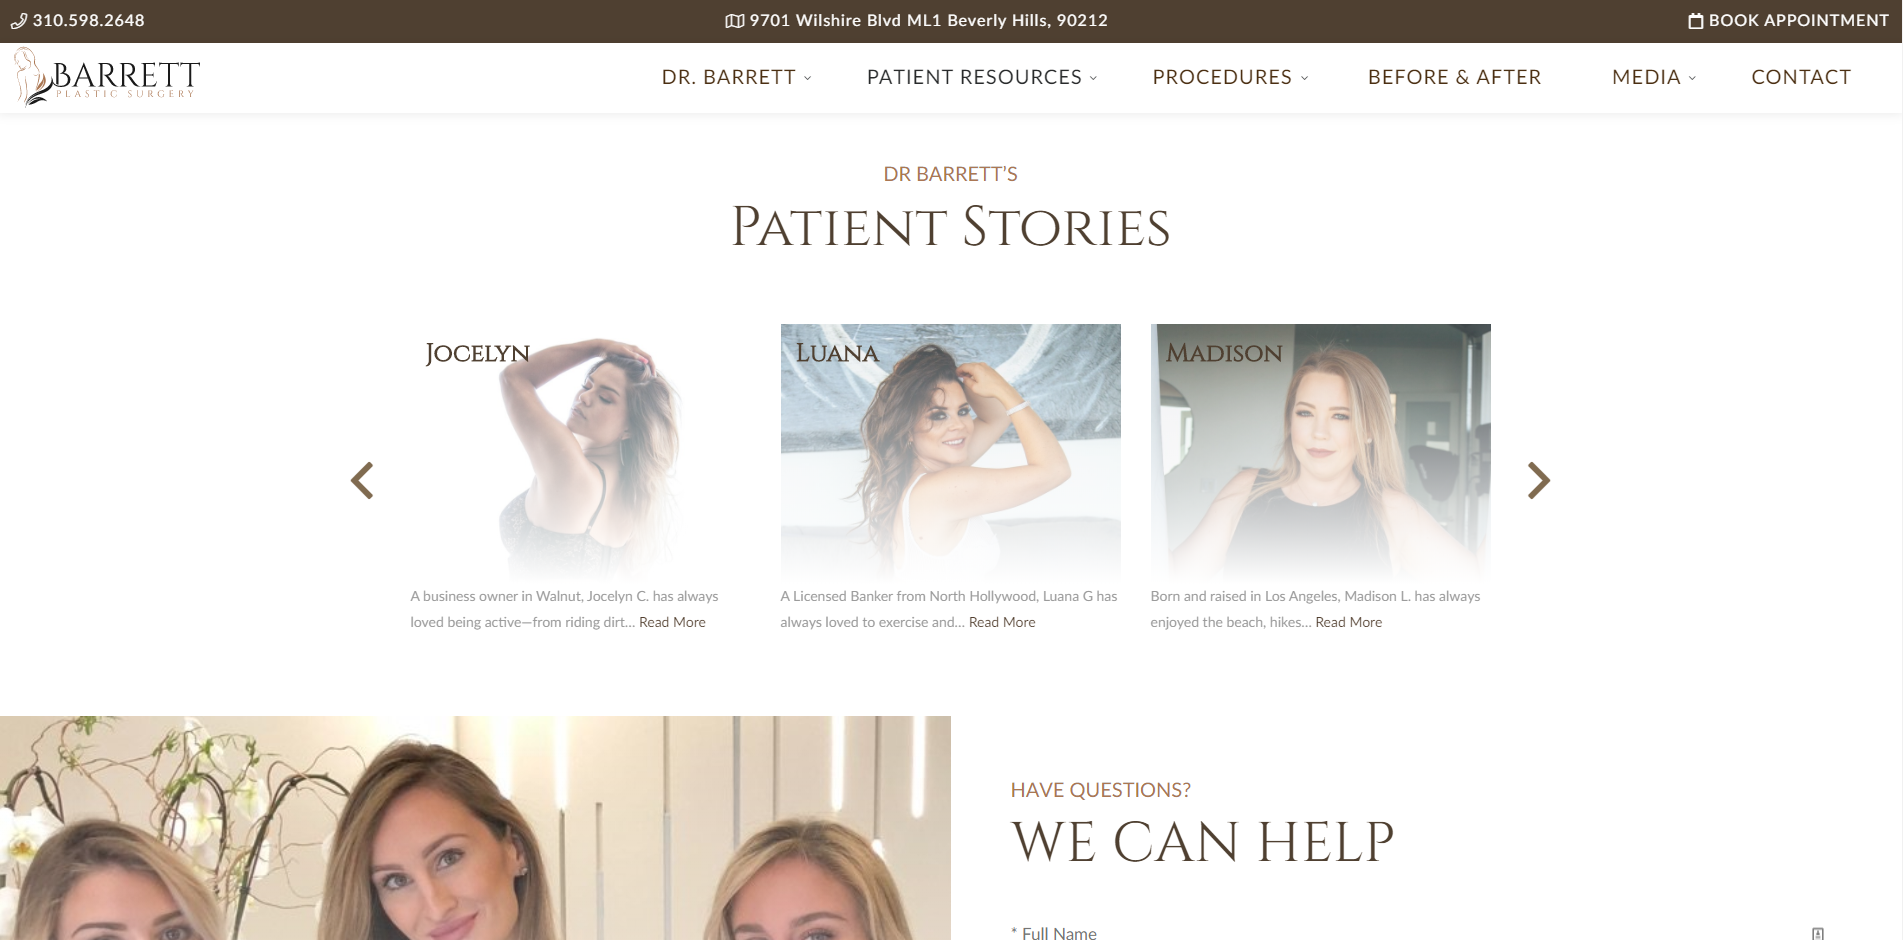 Barrett Plastic Surgery patient stories, which feature the name and photograph of the patient.